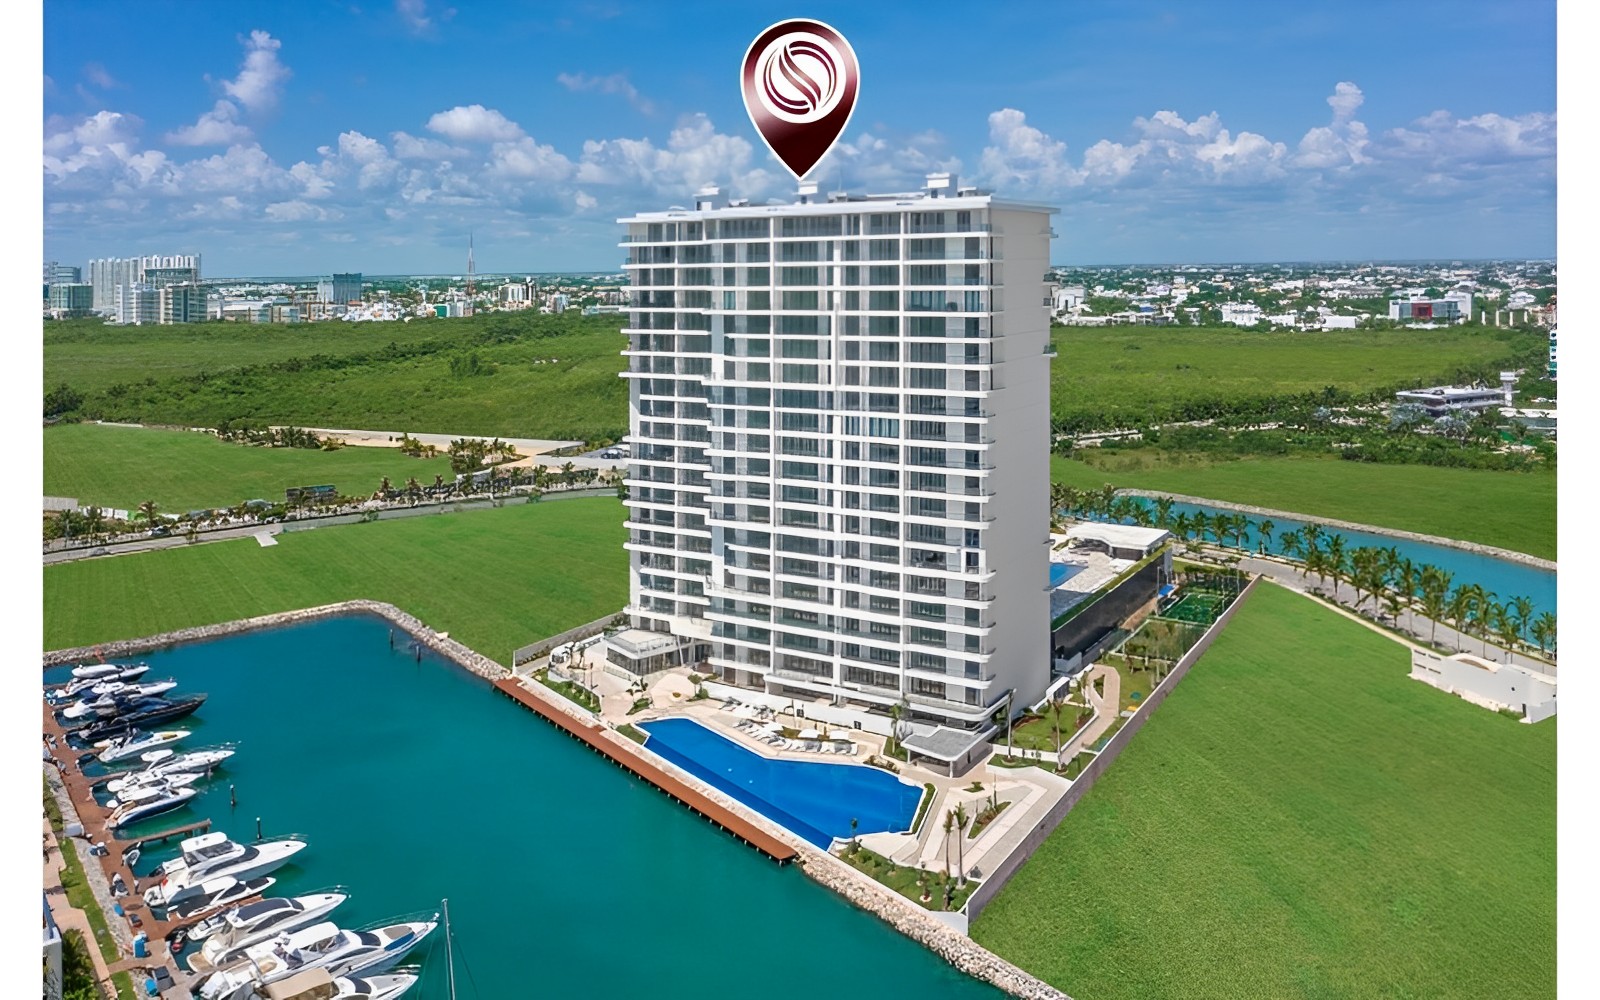 Condo with views of the sea in a sustainable building golf course in a nature reserve. Fully equipped and with amenities, semi-Olympic pool